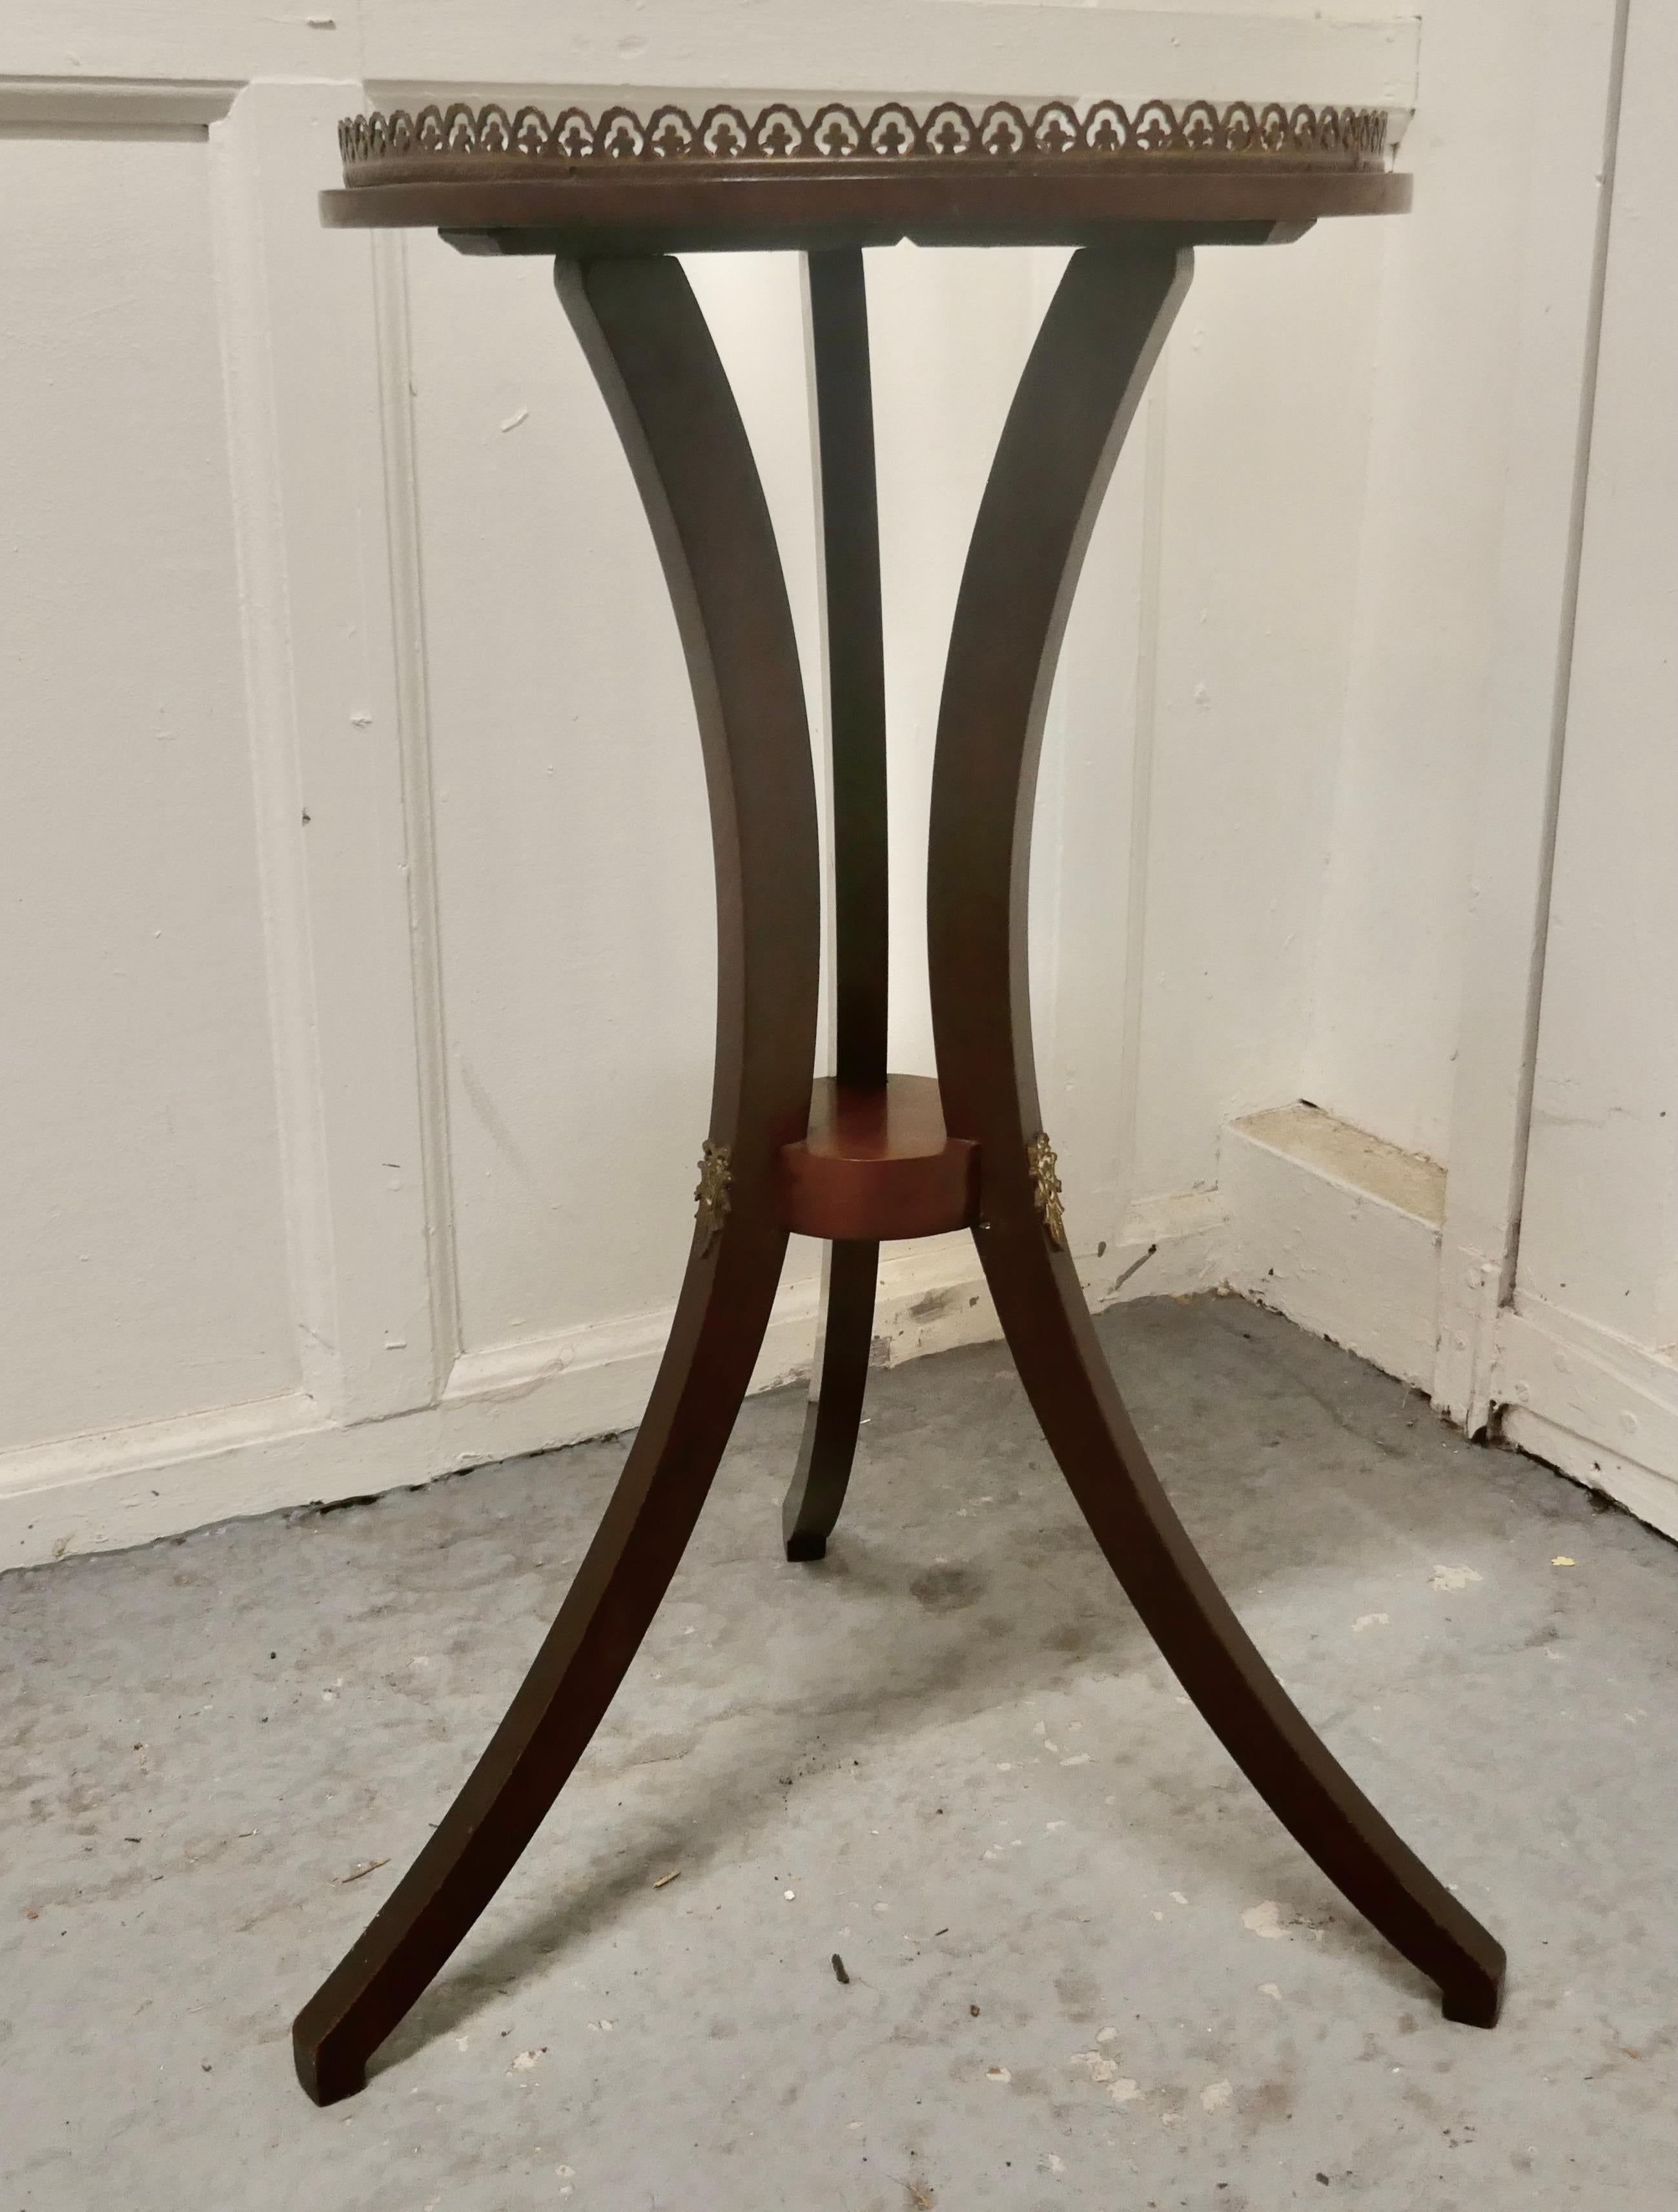 Regency style mahogany wine table with gallery

This lovely and unusual table stands on a very unusual three leg splayed base
The round mahogany top is made from a single piece of wood which has a pierced brass gallery 

A fantastic looking